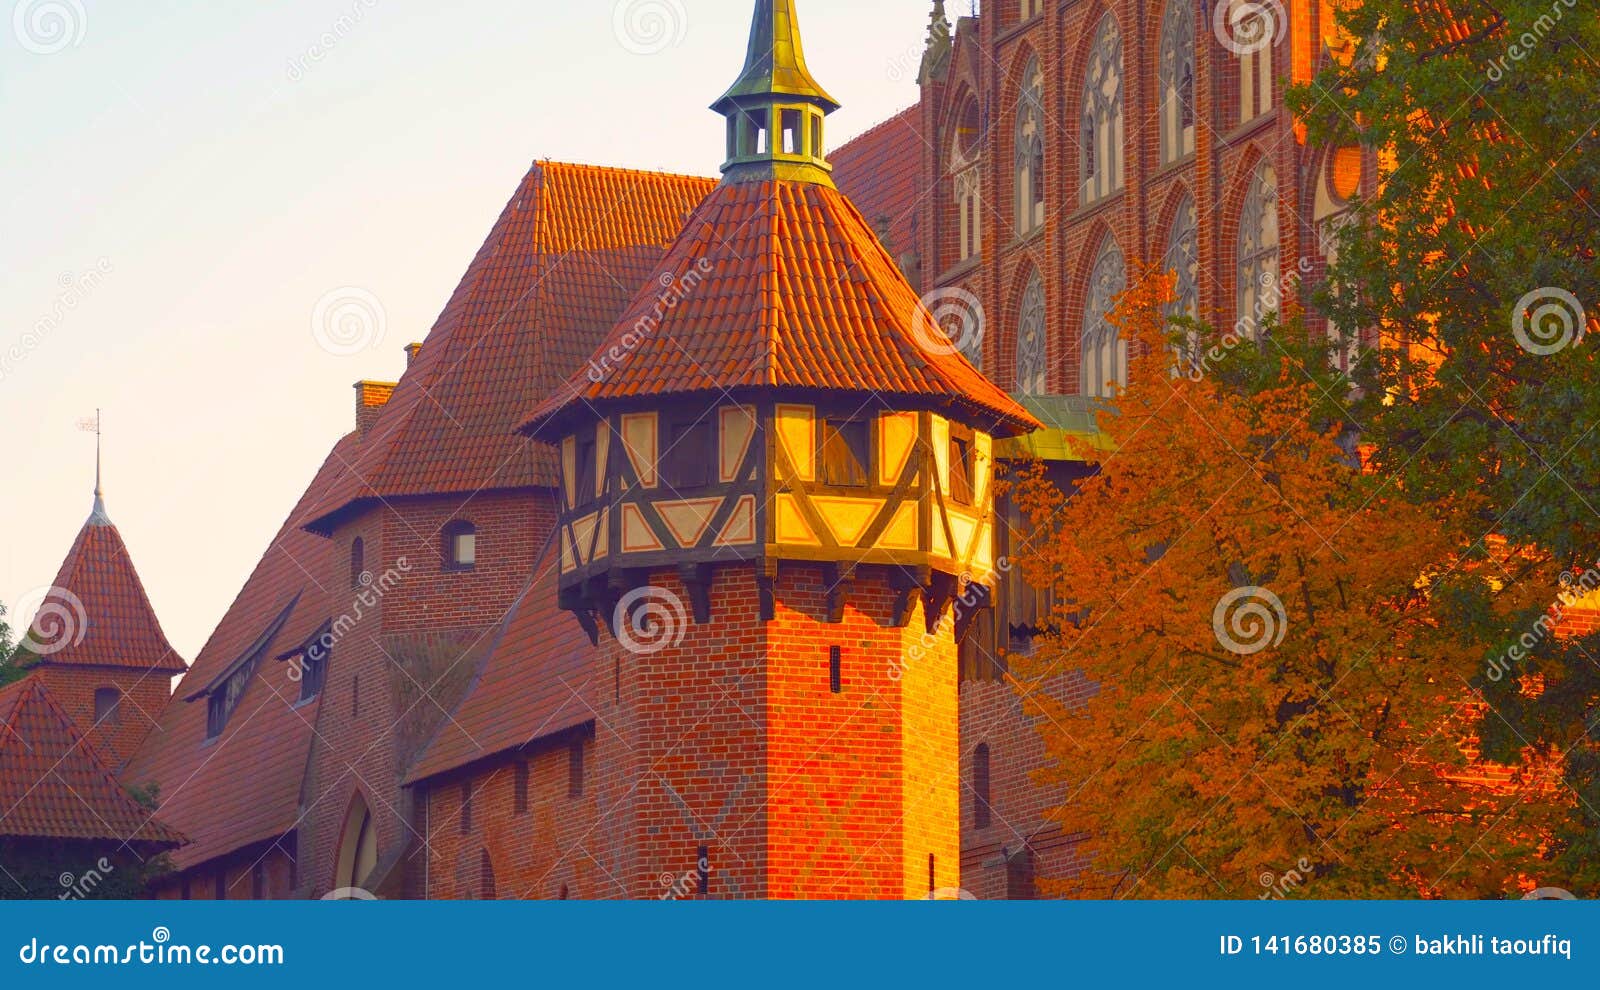 the roof of an old building in poland. the color of the wall is red in the traditional style